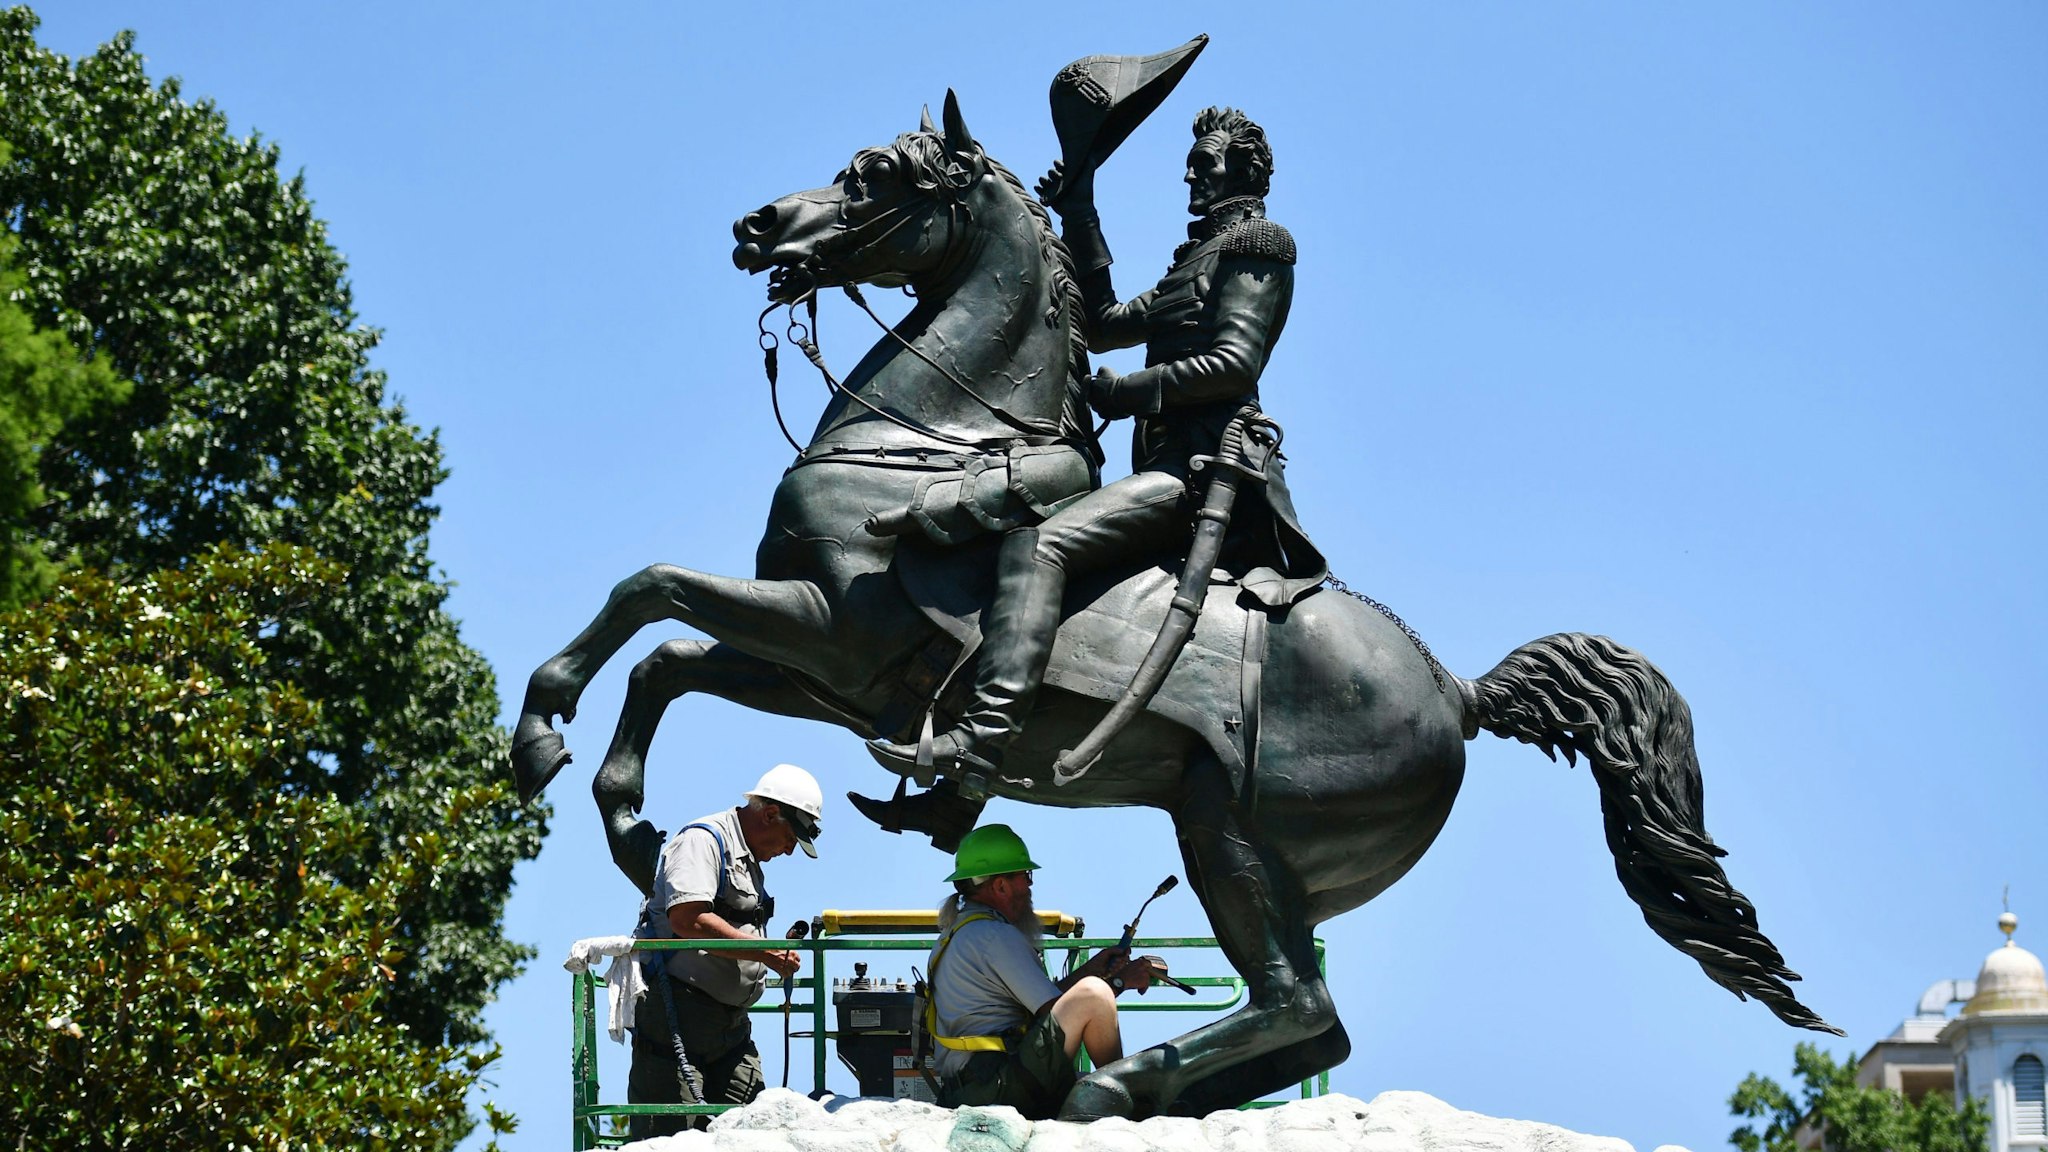 Workers clean a statue of Andrew Jackson in the recently reopened Lafayette Square near the White House, in Washington, DC on June 12, 2020.